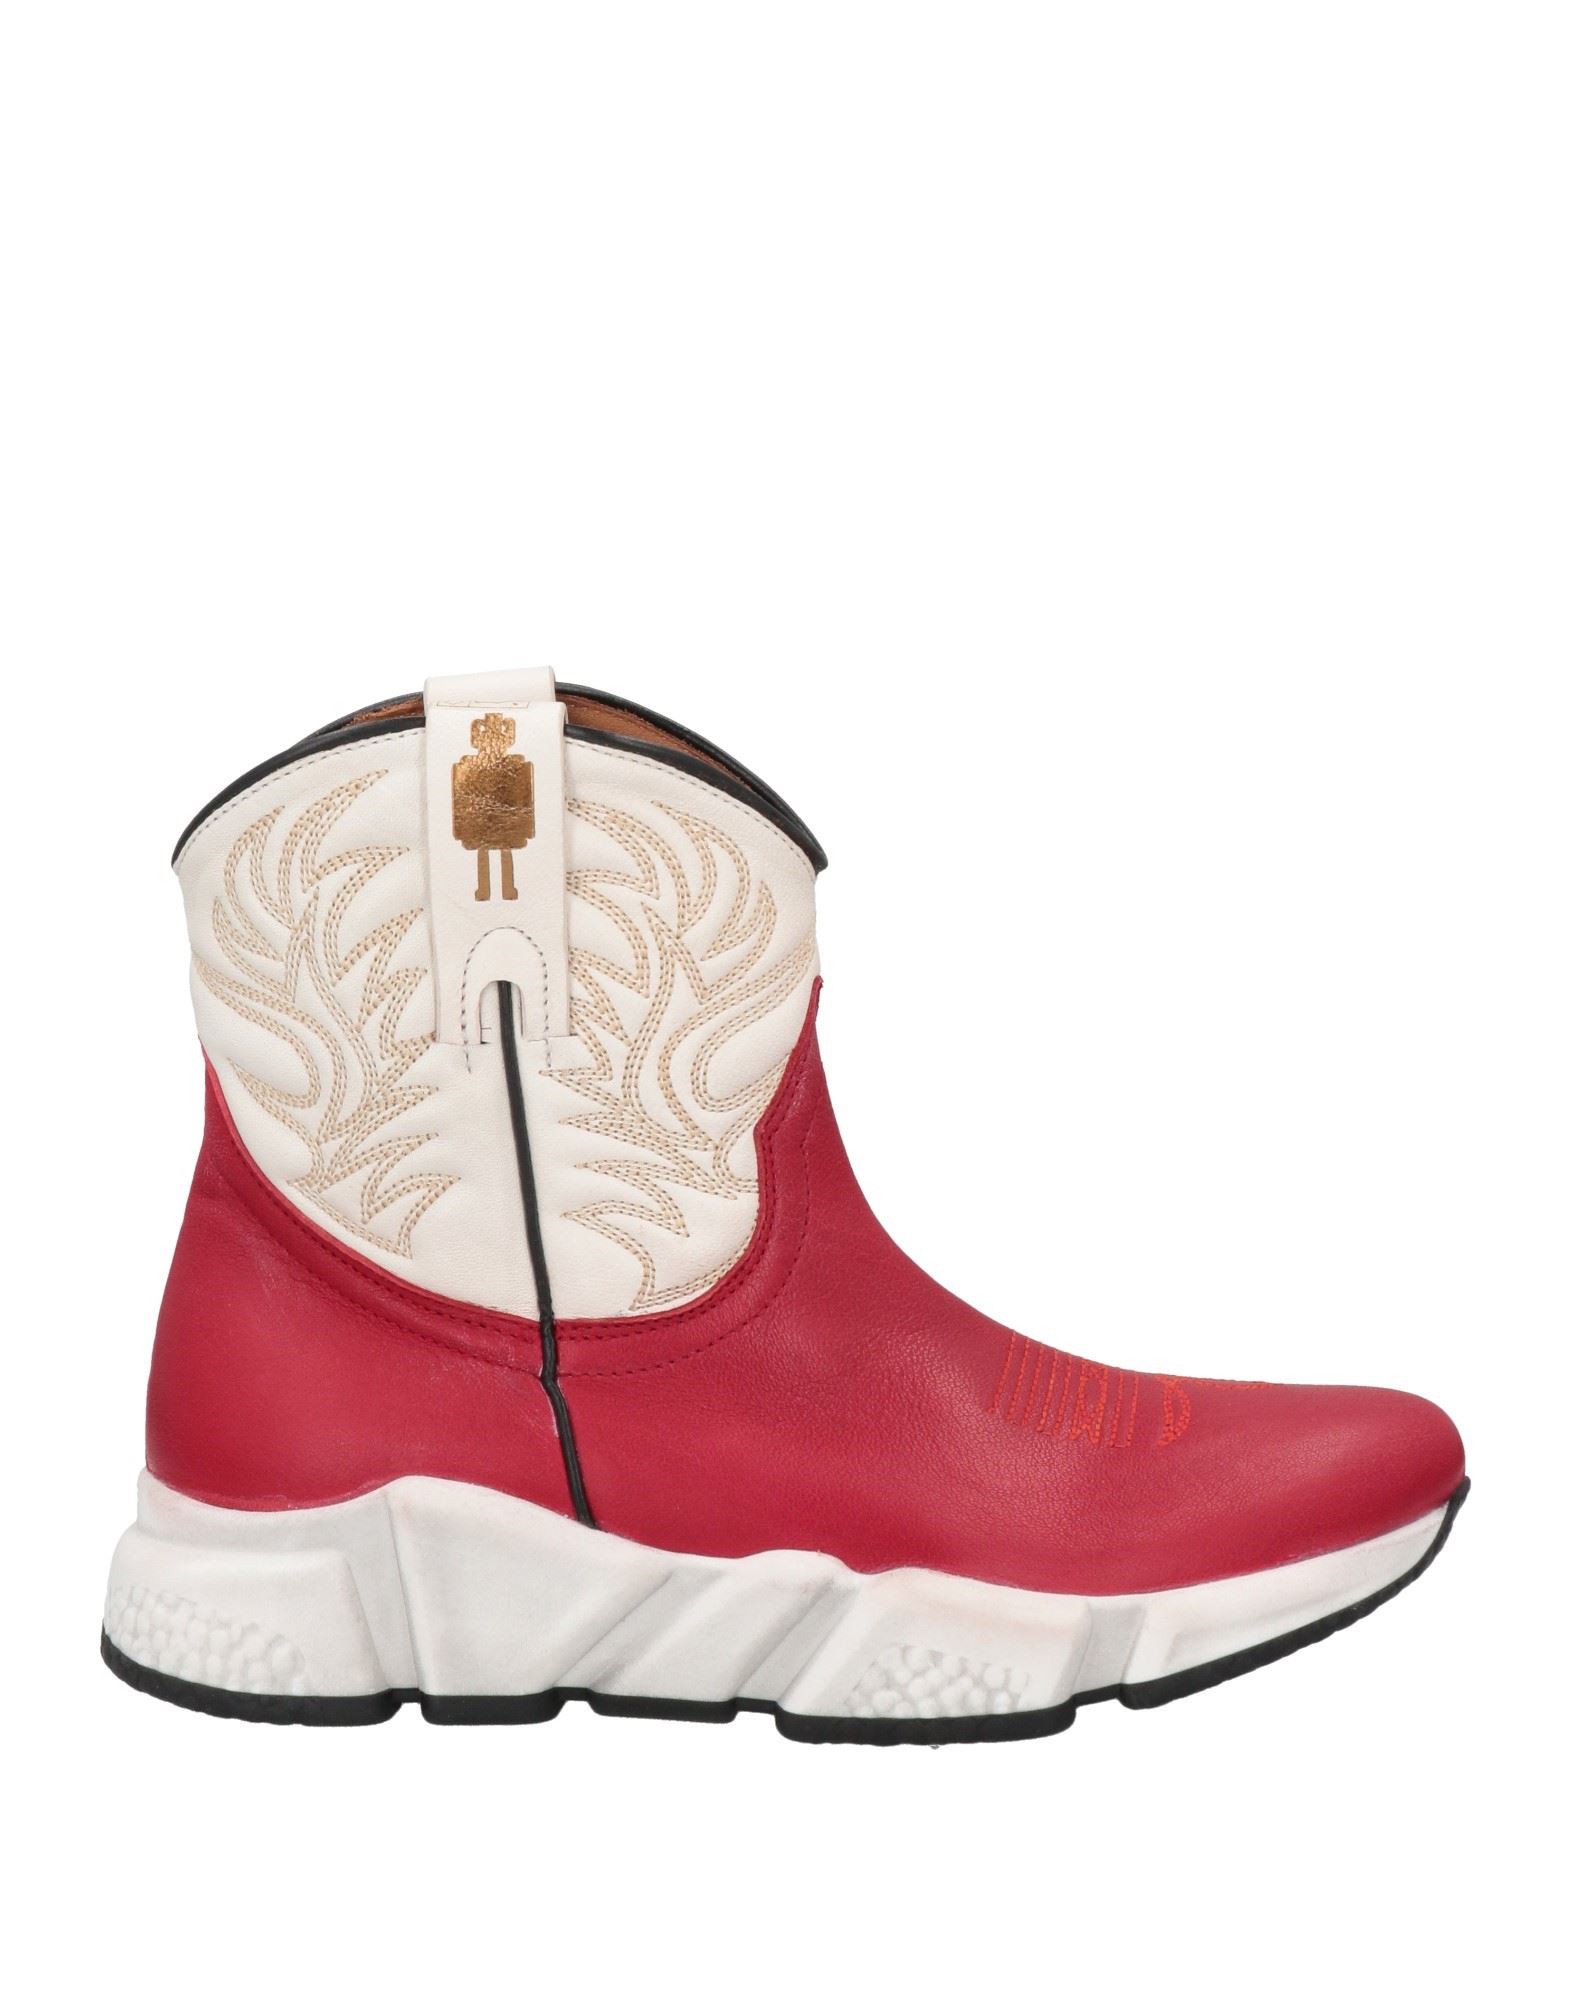 Shop Texas Robot Woman Ankle Boots Red Size 6 Soft Leather